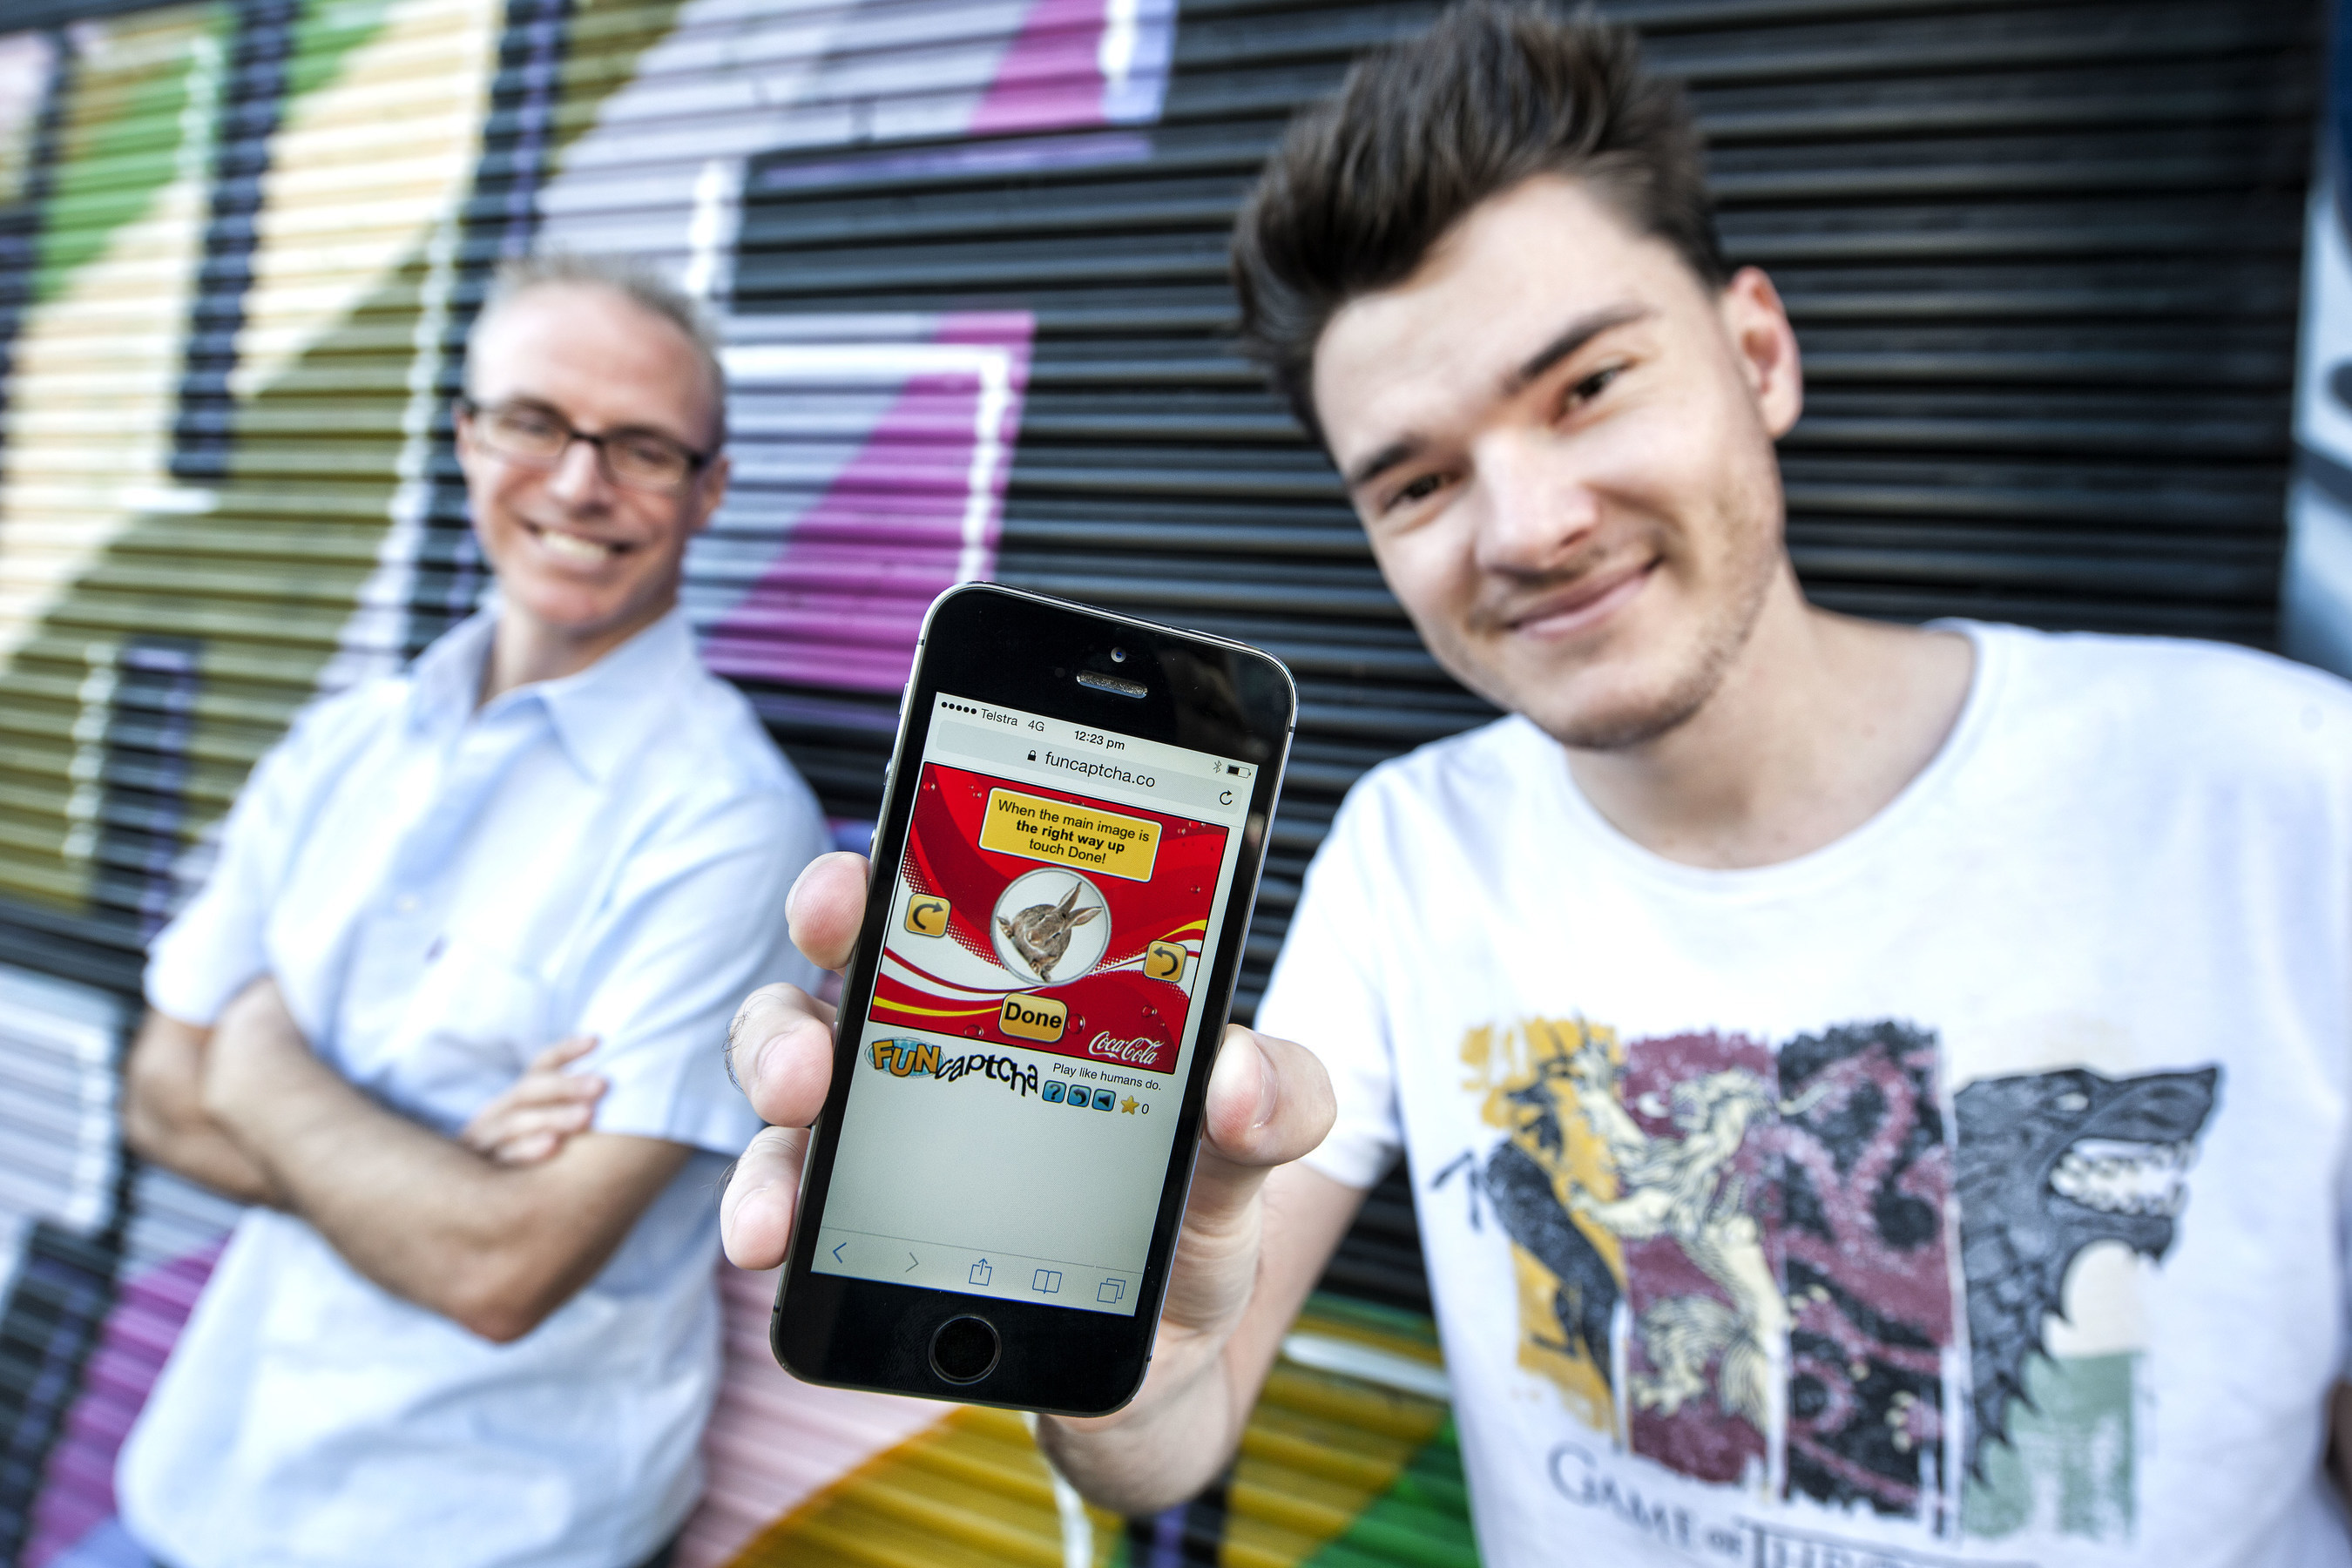 FunCaptcha Founders Matthew Ford (l) and Kevin Gosschalk (r) with FunCaptcha on a mobile app. FunCaptcha uses gamified technology that is easy for humans but impractical for bots and automated systems to complete. - Photo Credit: Erika Fish, QUT